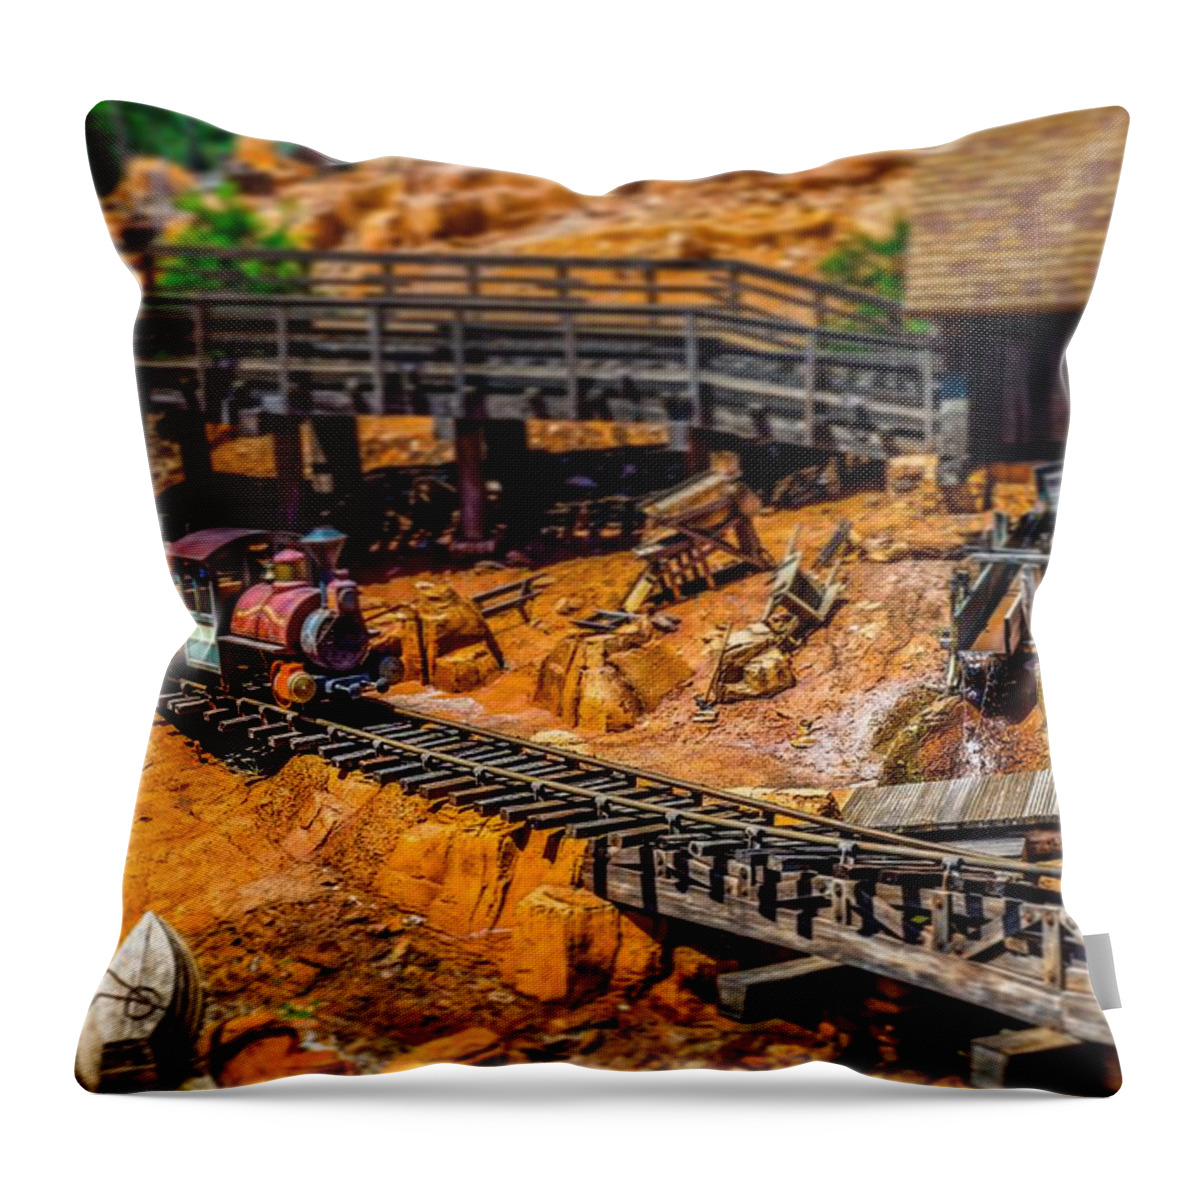  Throw Pillow featuring the photograph Big Thunder Mountain Railroad by Rodney Lee Williams